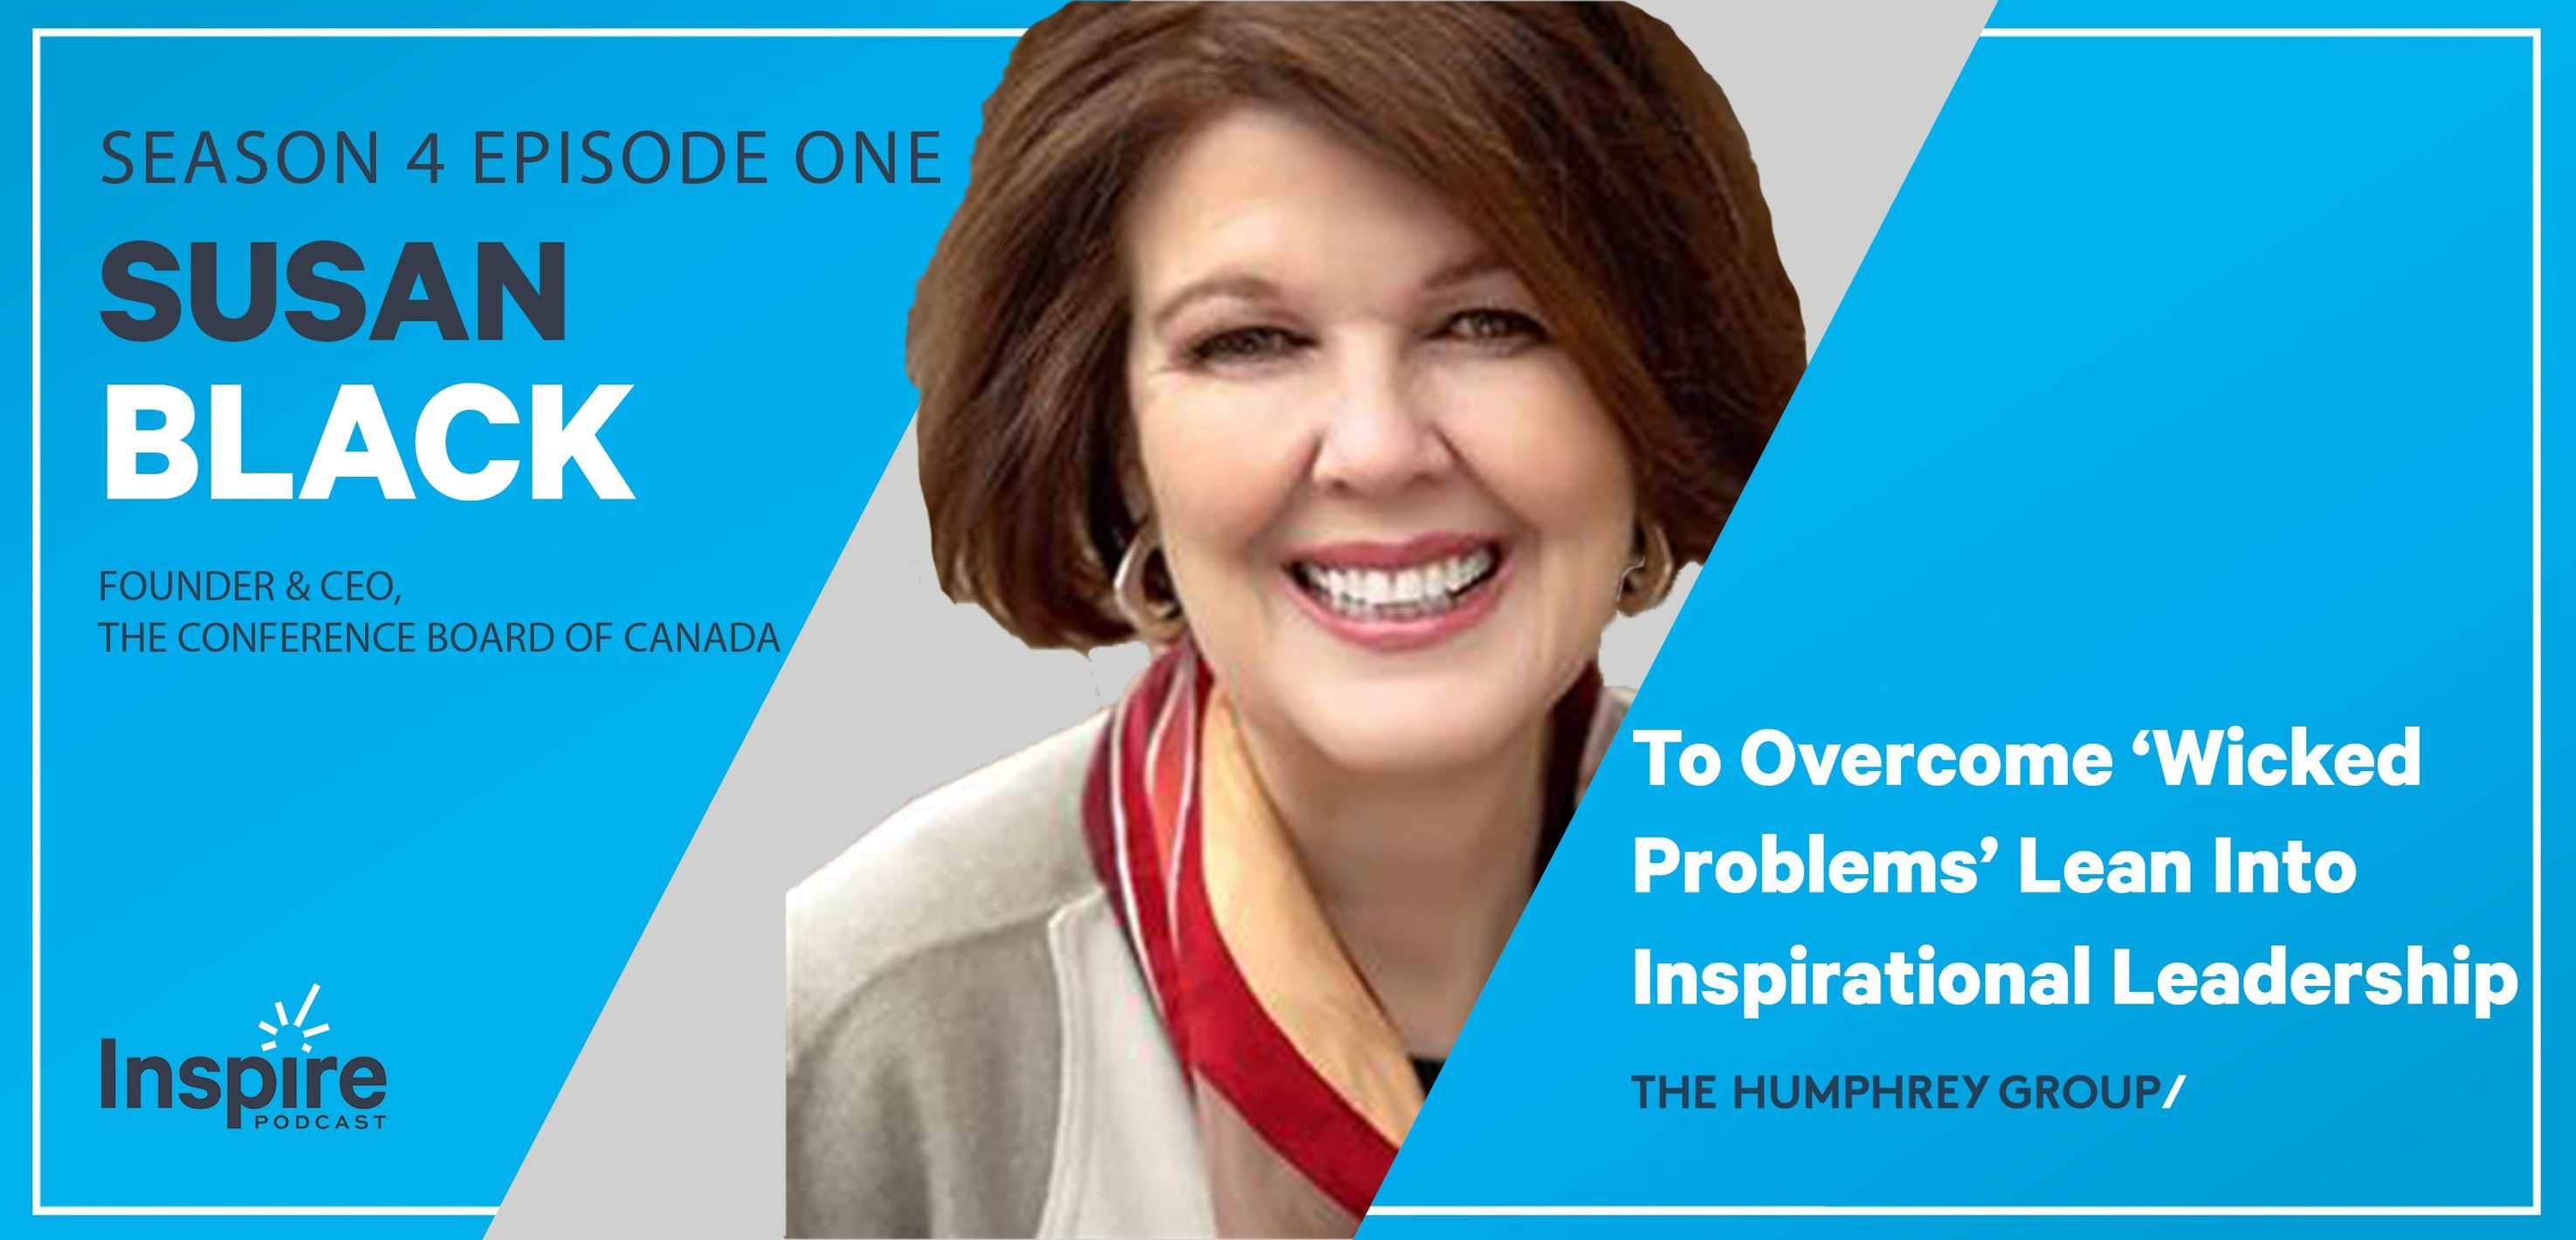 The Humphrey Group Inc - Vancouver, CA, diversity equity and inclusion training